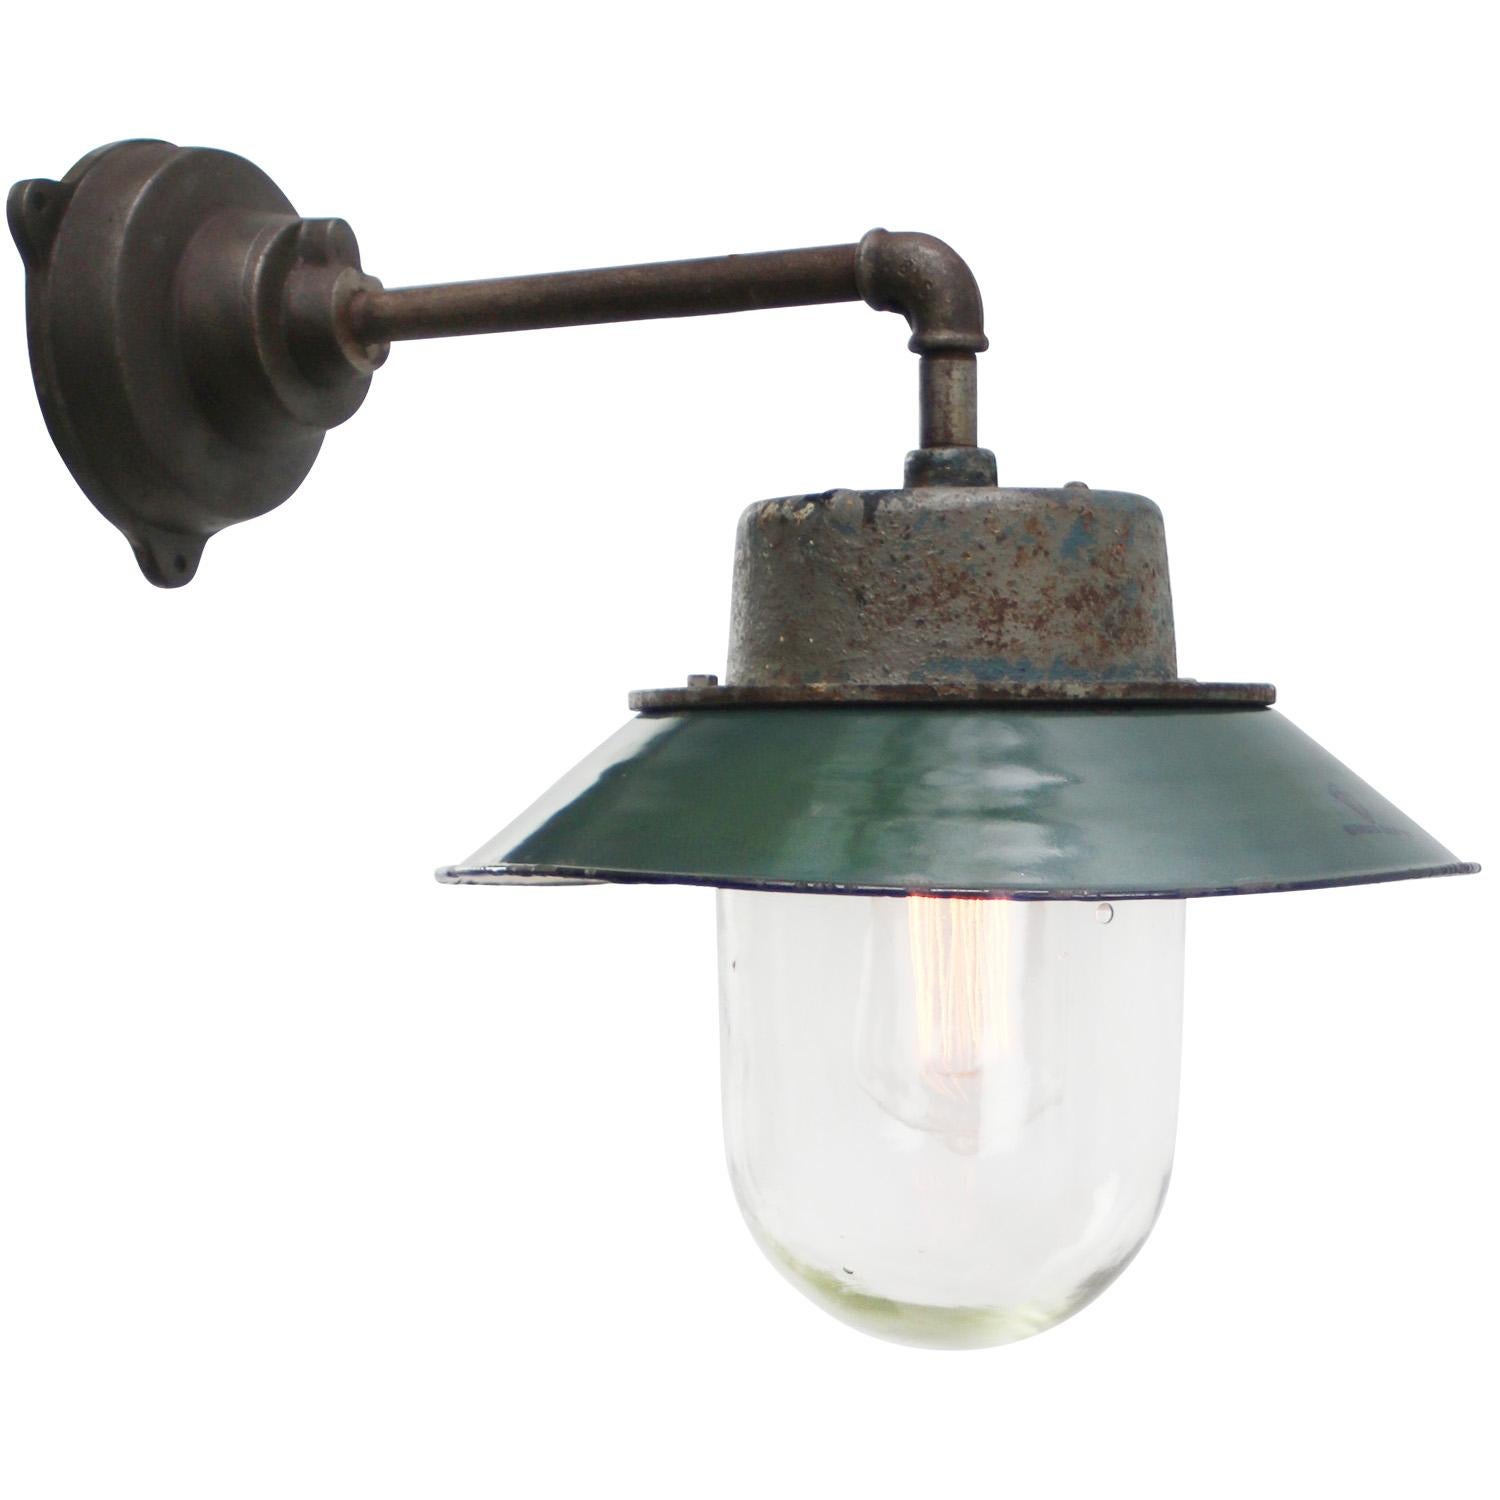 Petrol enamel Industrial wall light.
Cast iron top.
Clear glass.

Diameter cast iron wall piece: 12 cm. Three holes to secure.

Weight: 6.70 kg / 14.8 lb

Priced per individual item. All lamps have been made suitable by international standards for